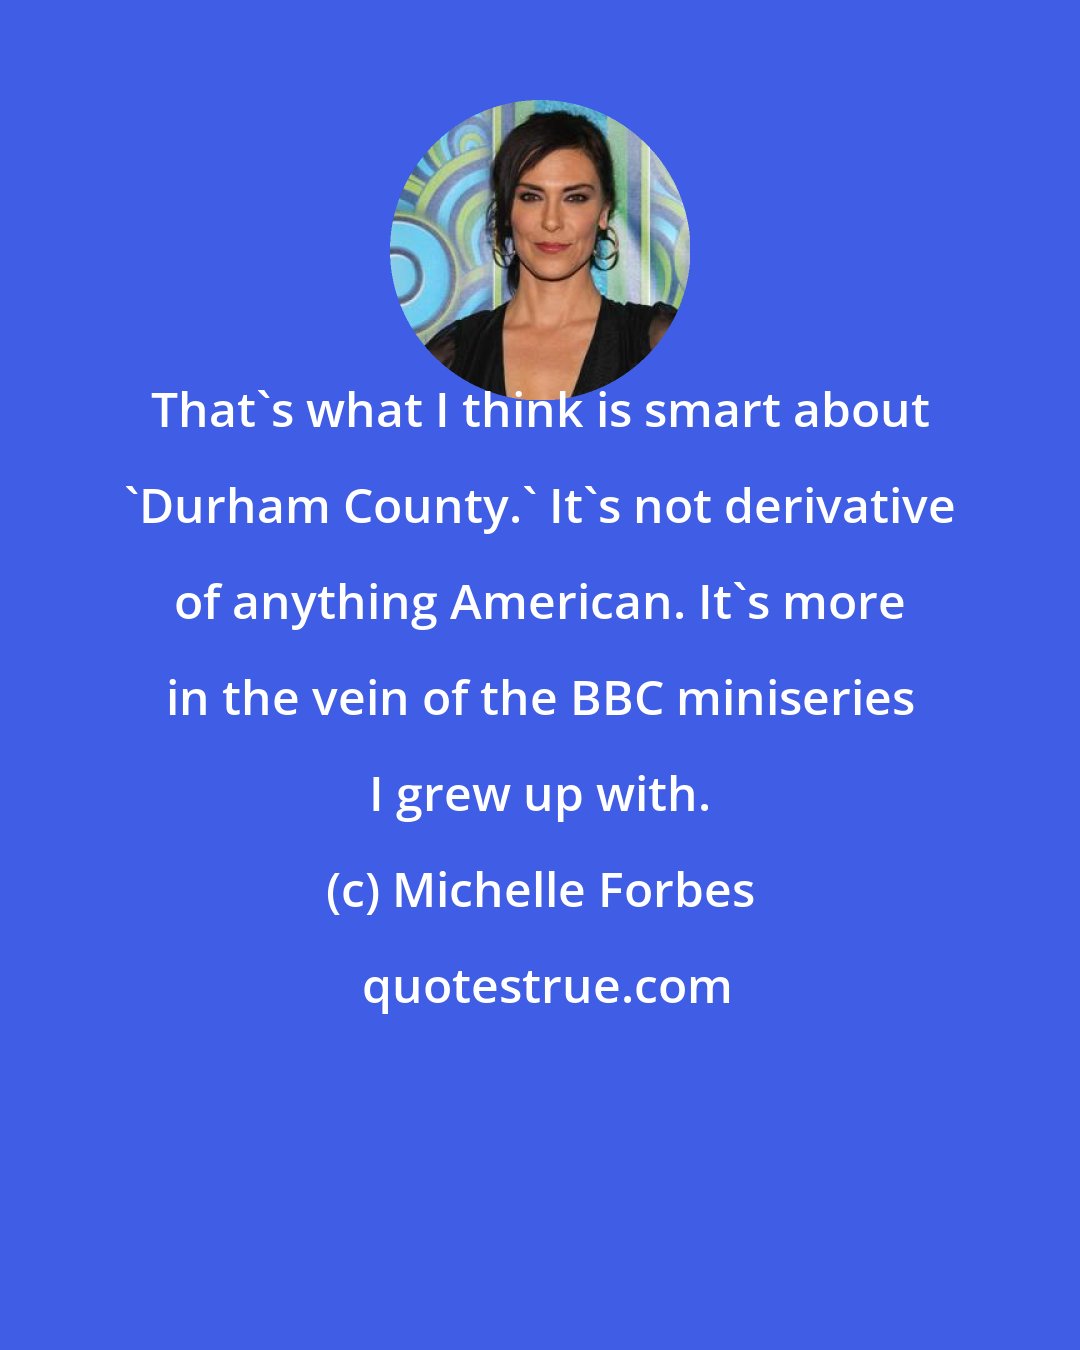 Michelle Forbes: That's what I think is smart about 'Durham County.' It's not derivative of anything American. It's more in the vein of the BBC miniseries I grew up with.